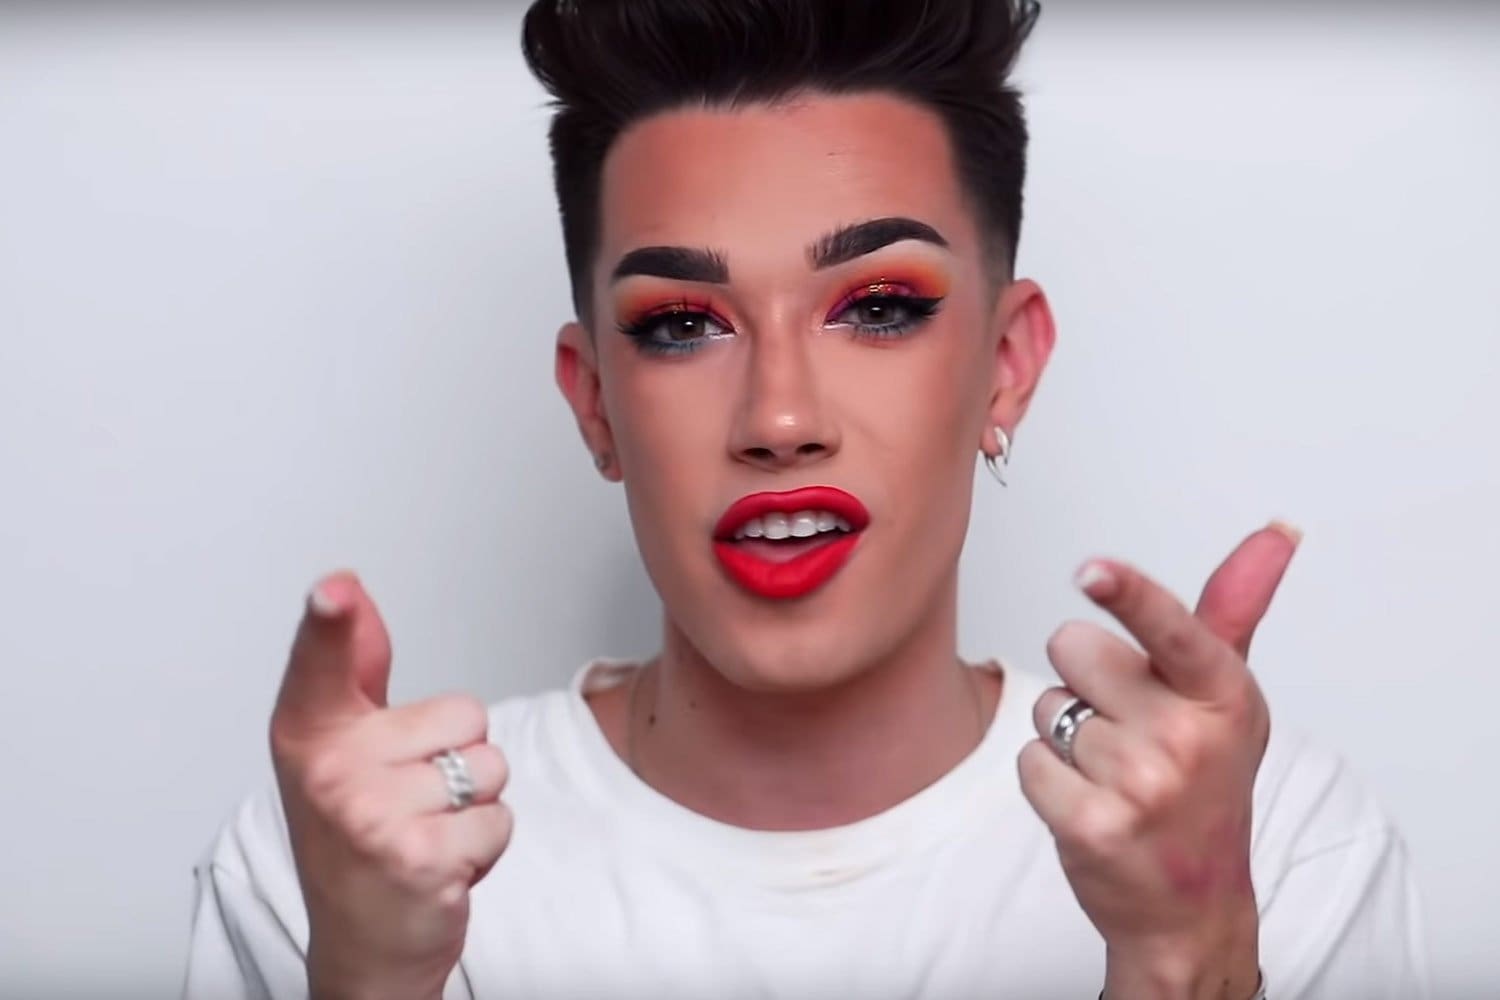 James Charles Drama Intensifies: 'The Makeup God' Slid Into Model Jay Alvarrez's DMs And Called Him 'Daddy': He Has 'No Game' - Here's The Screenshot Of The Conversation